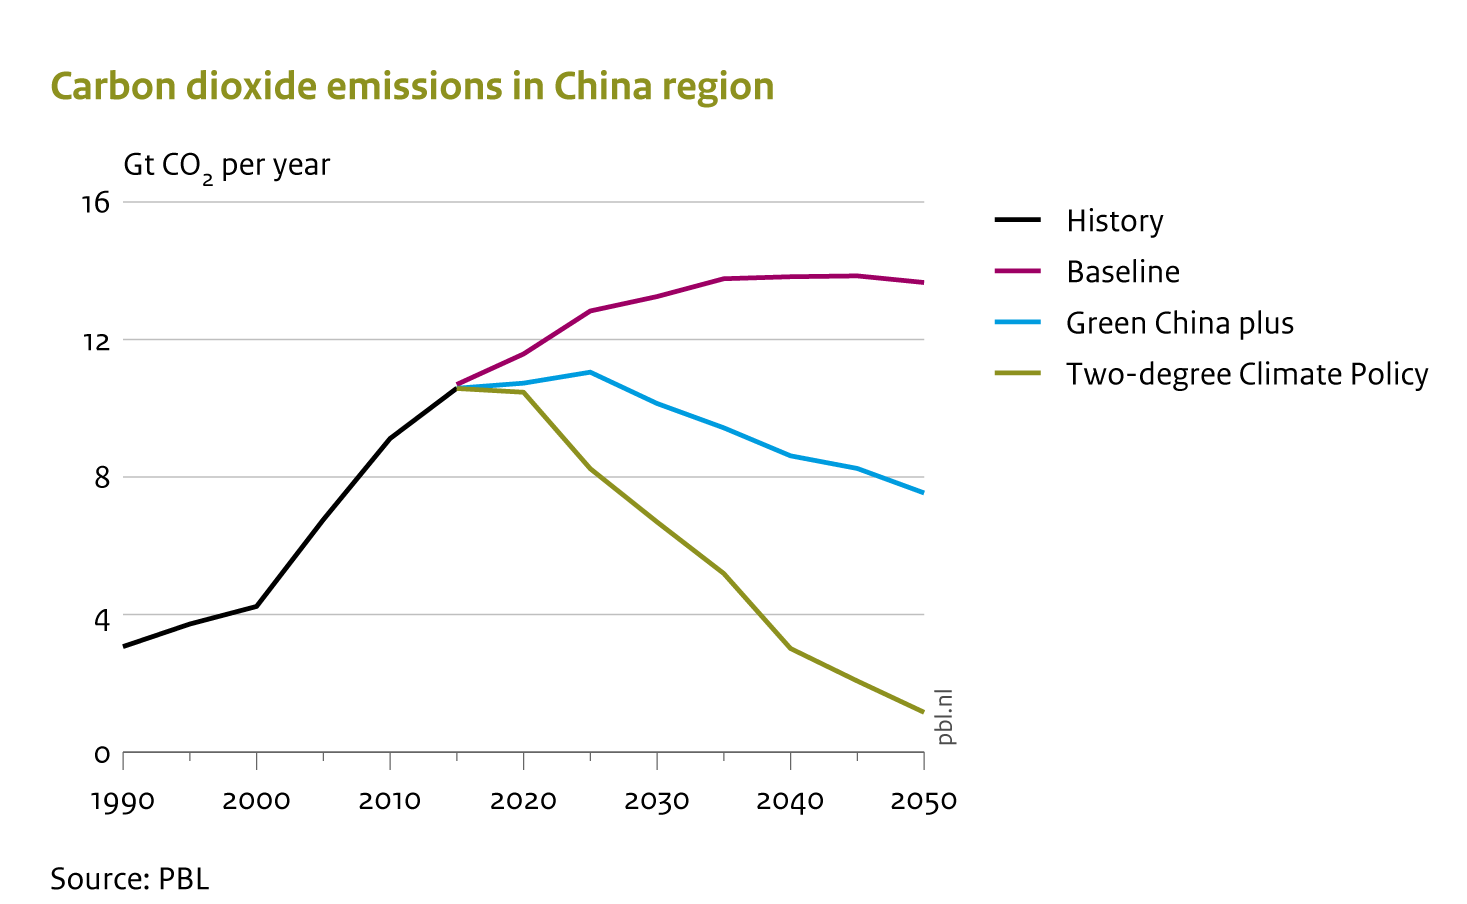 By 2050, under the Green China plus scenario, China’s carbon dioxide emissions will be almost halved, compared to those under the baseline scenario. However, this is only half of what is needed for climate stabilisation at an average warming of 2 °C.